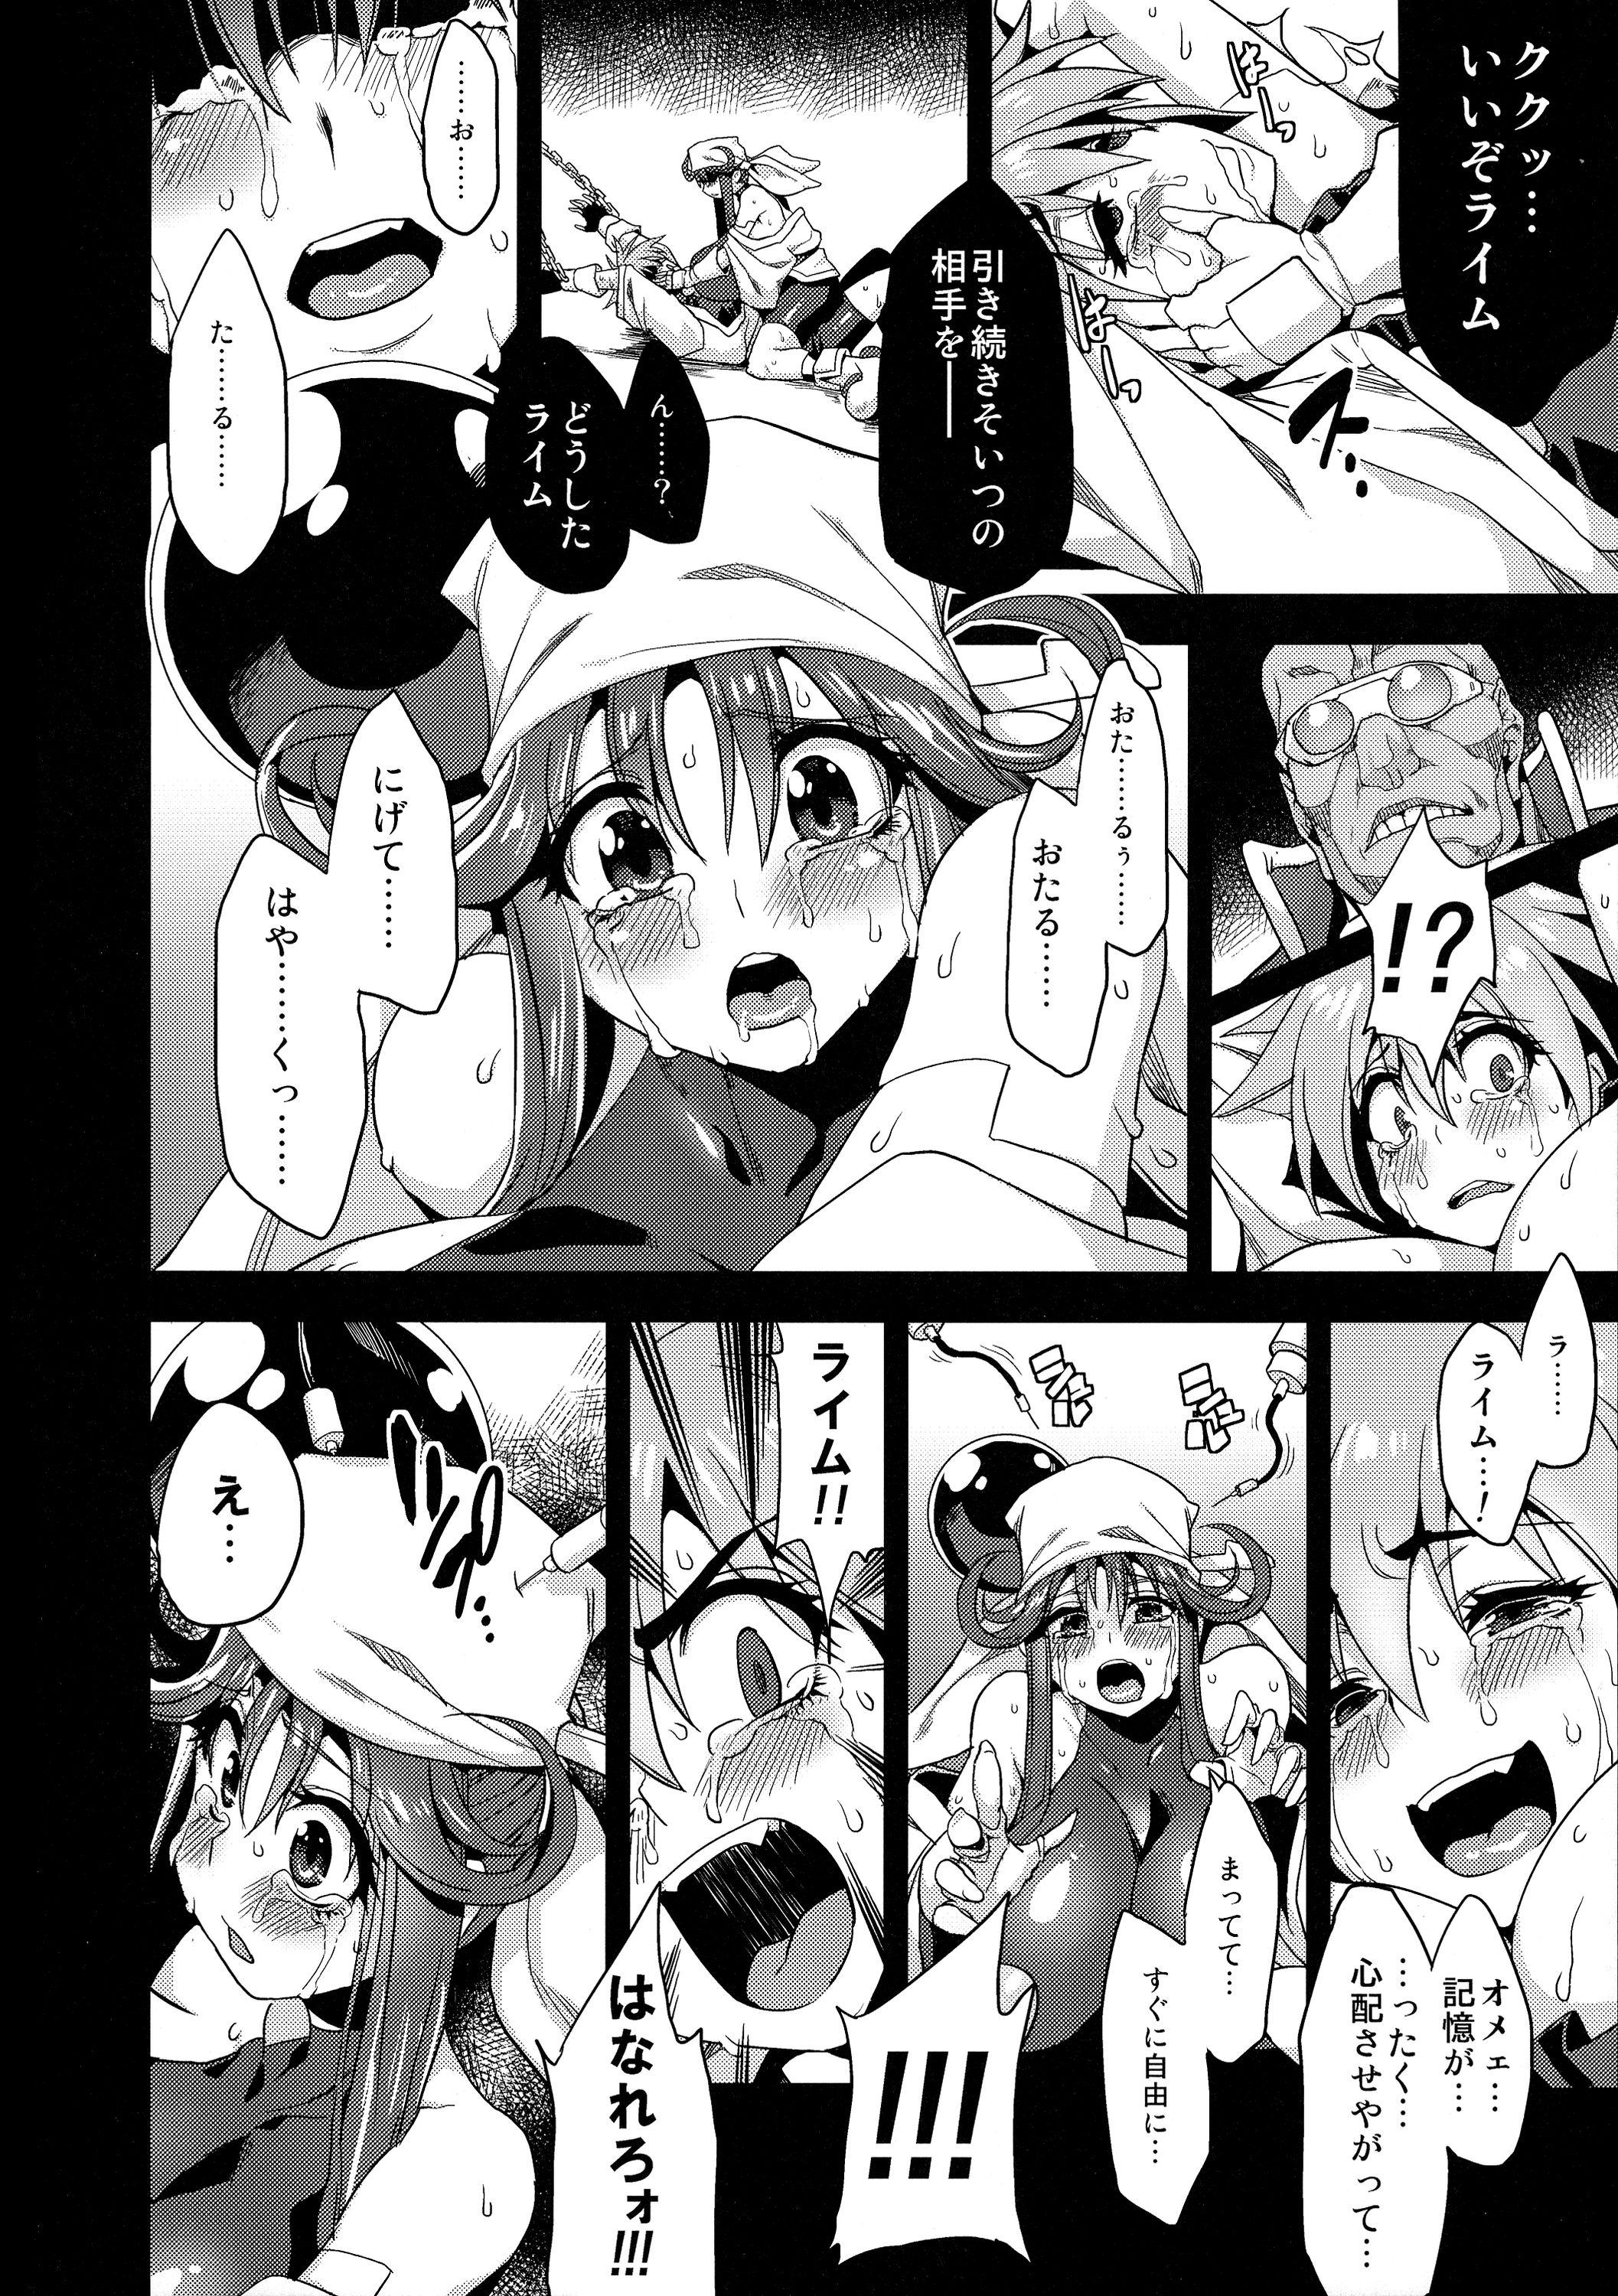 Big Butt Hentai Marionette 3 - Saber marionette Asses - Page 10